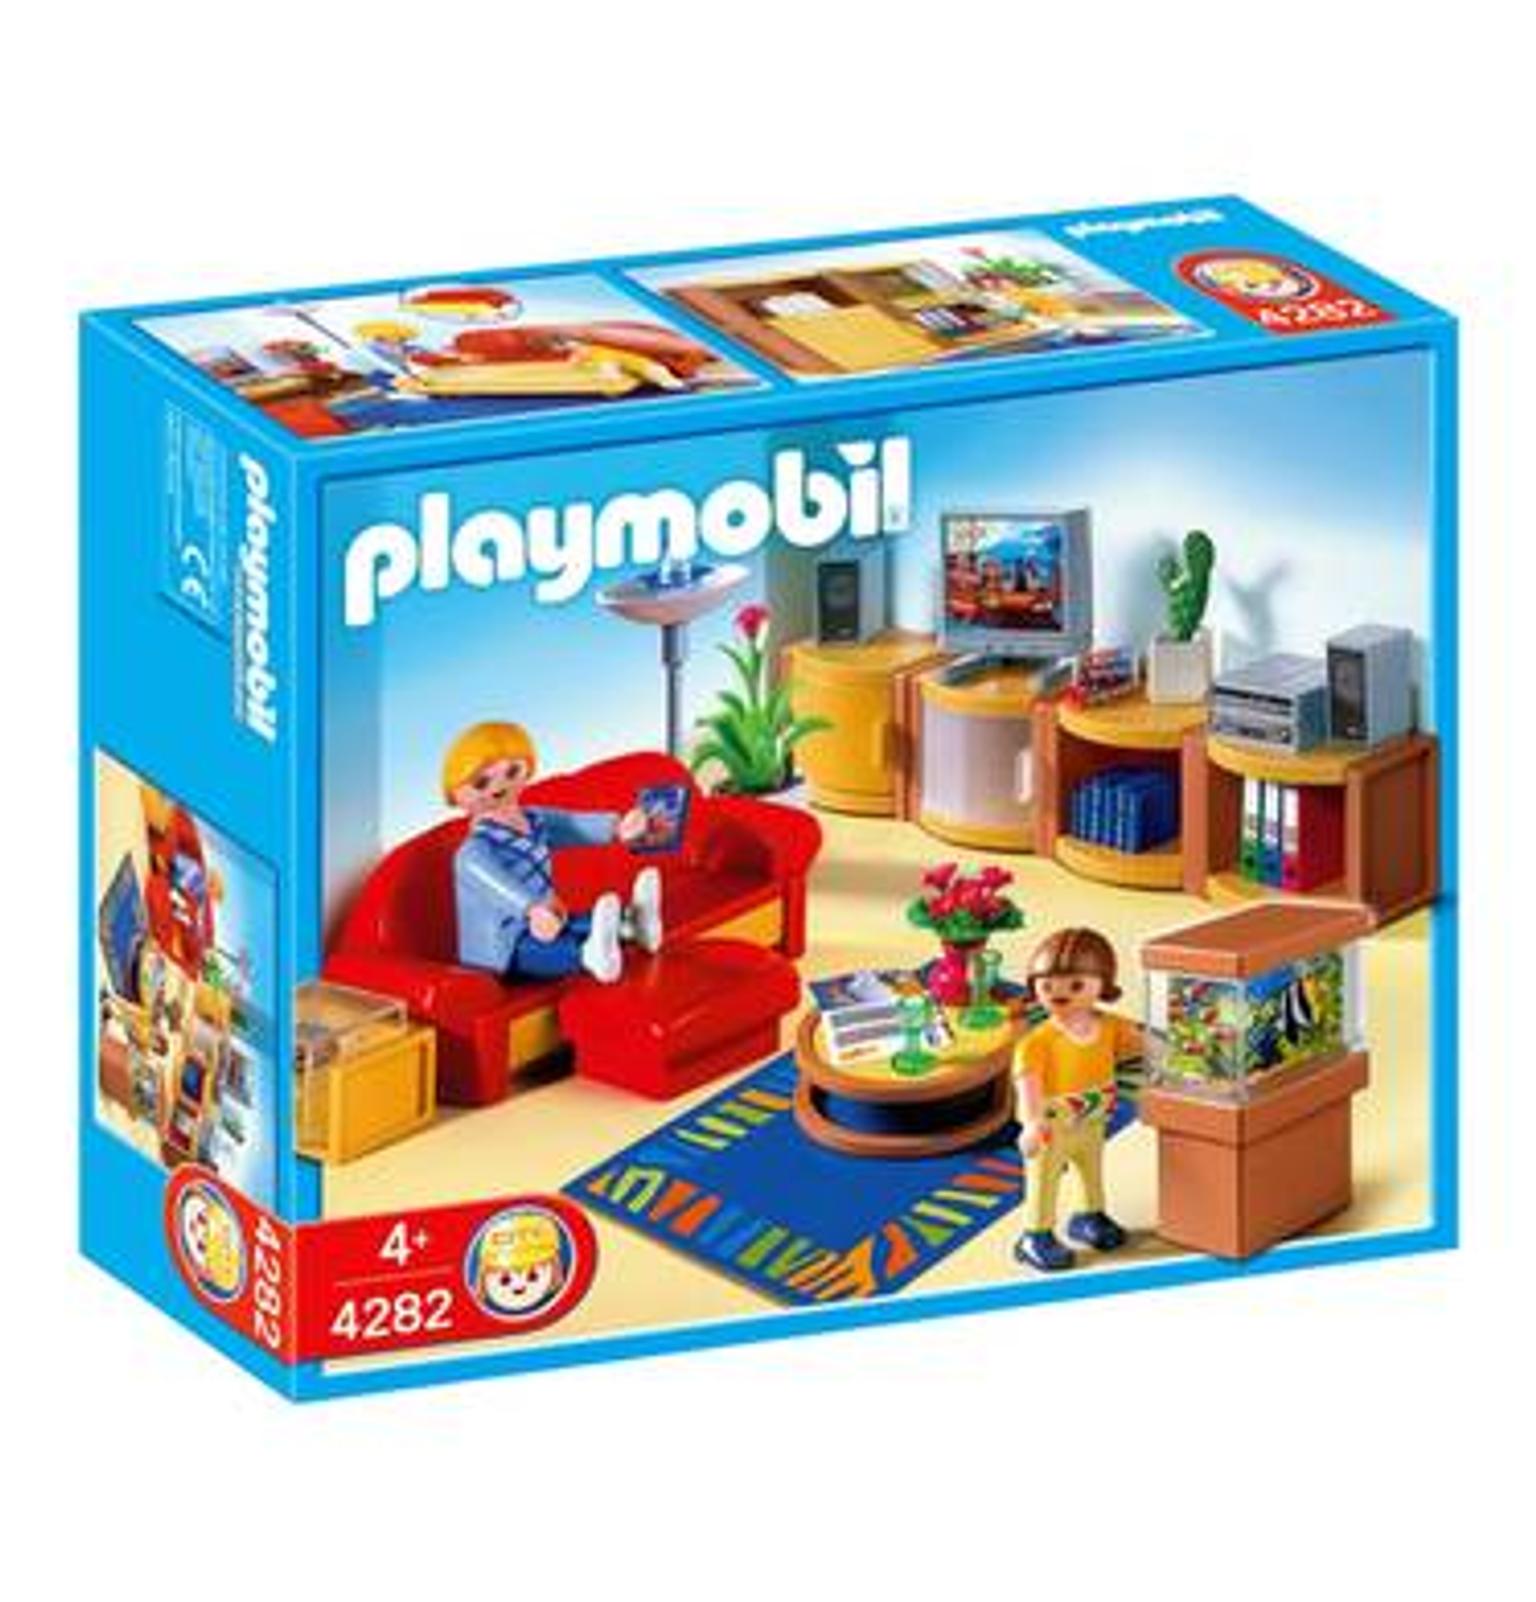 Playmobil 4282 Sonniges Wohnzimmer In 53844 Troisdorf For 18 00 For Sale Shpock